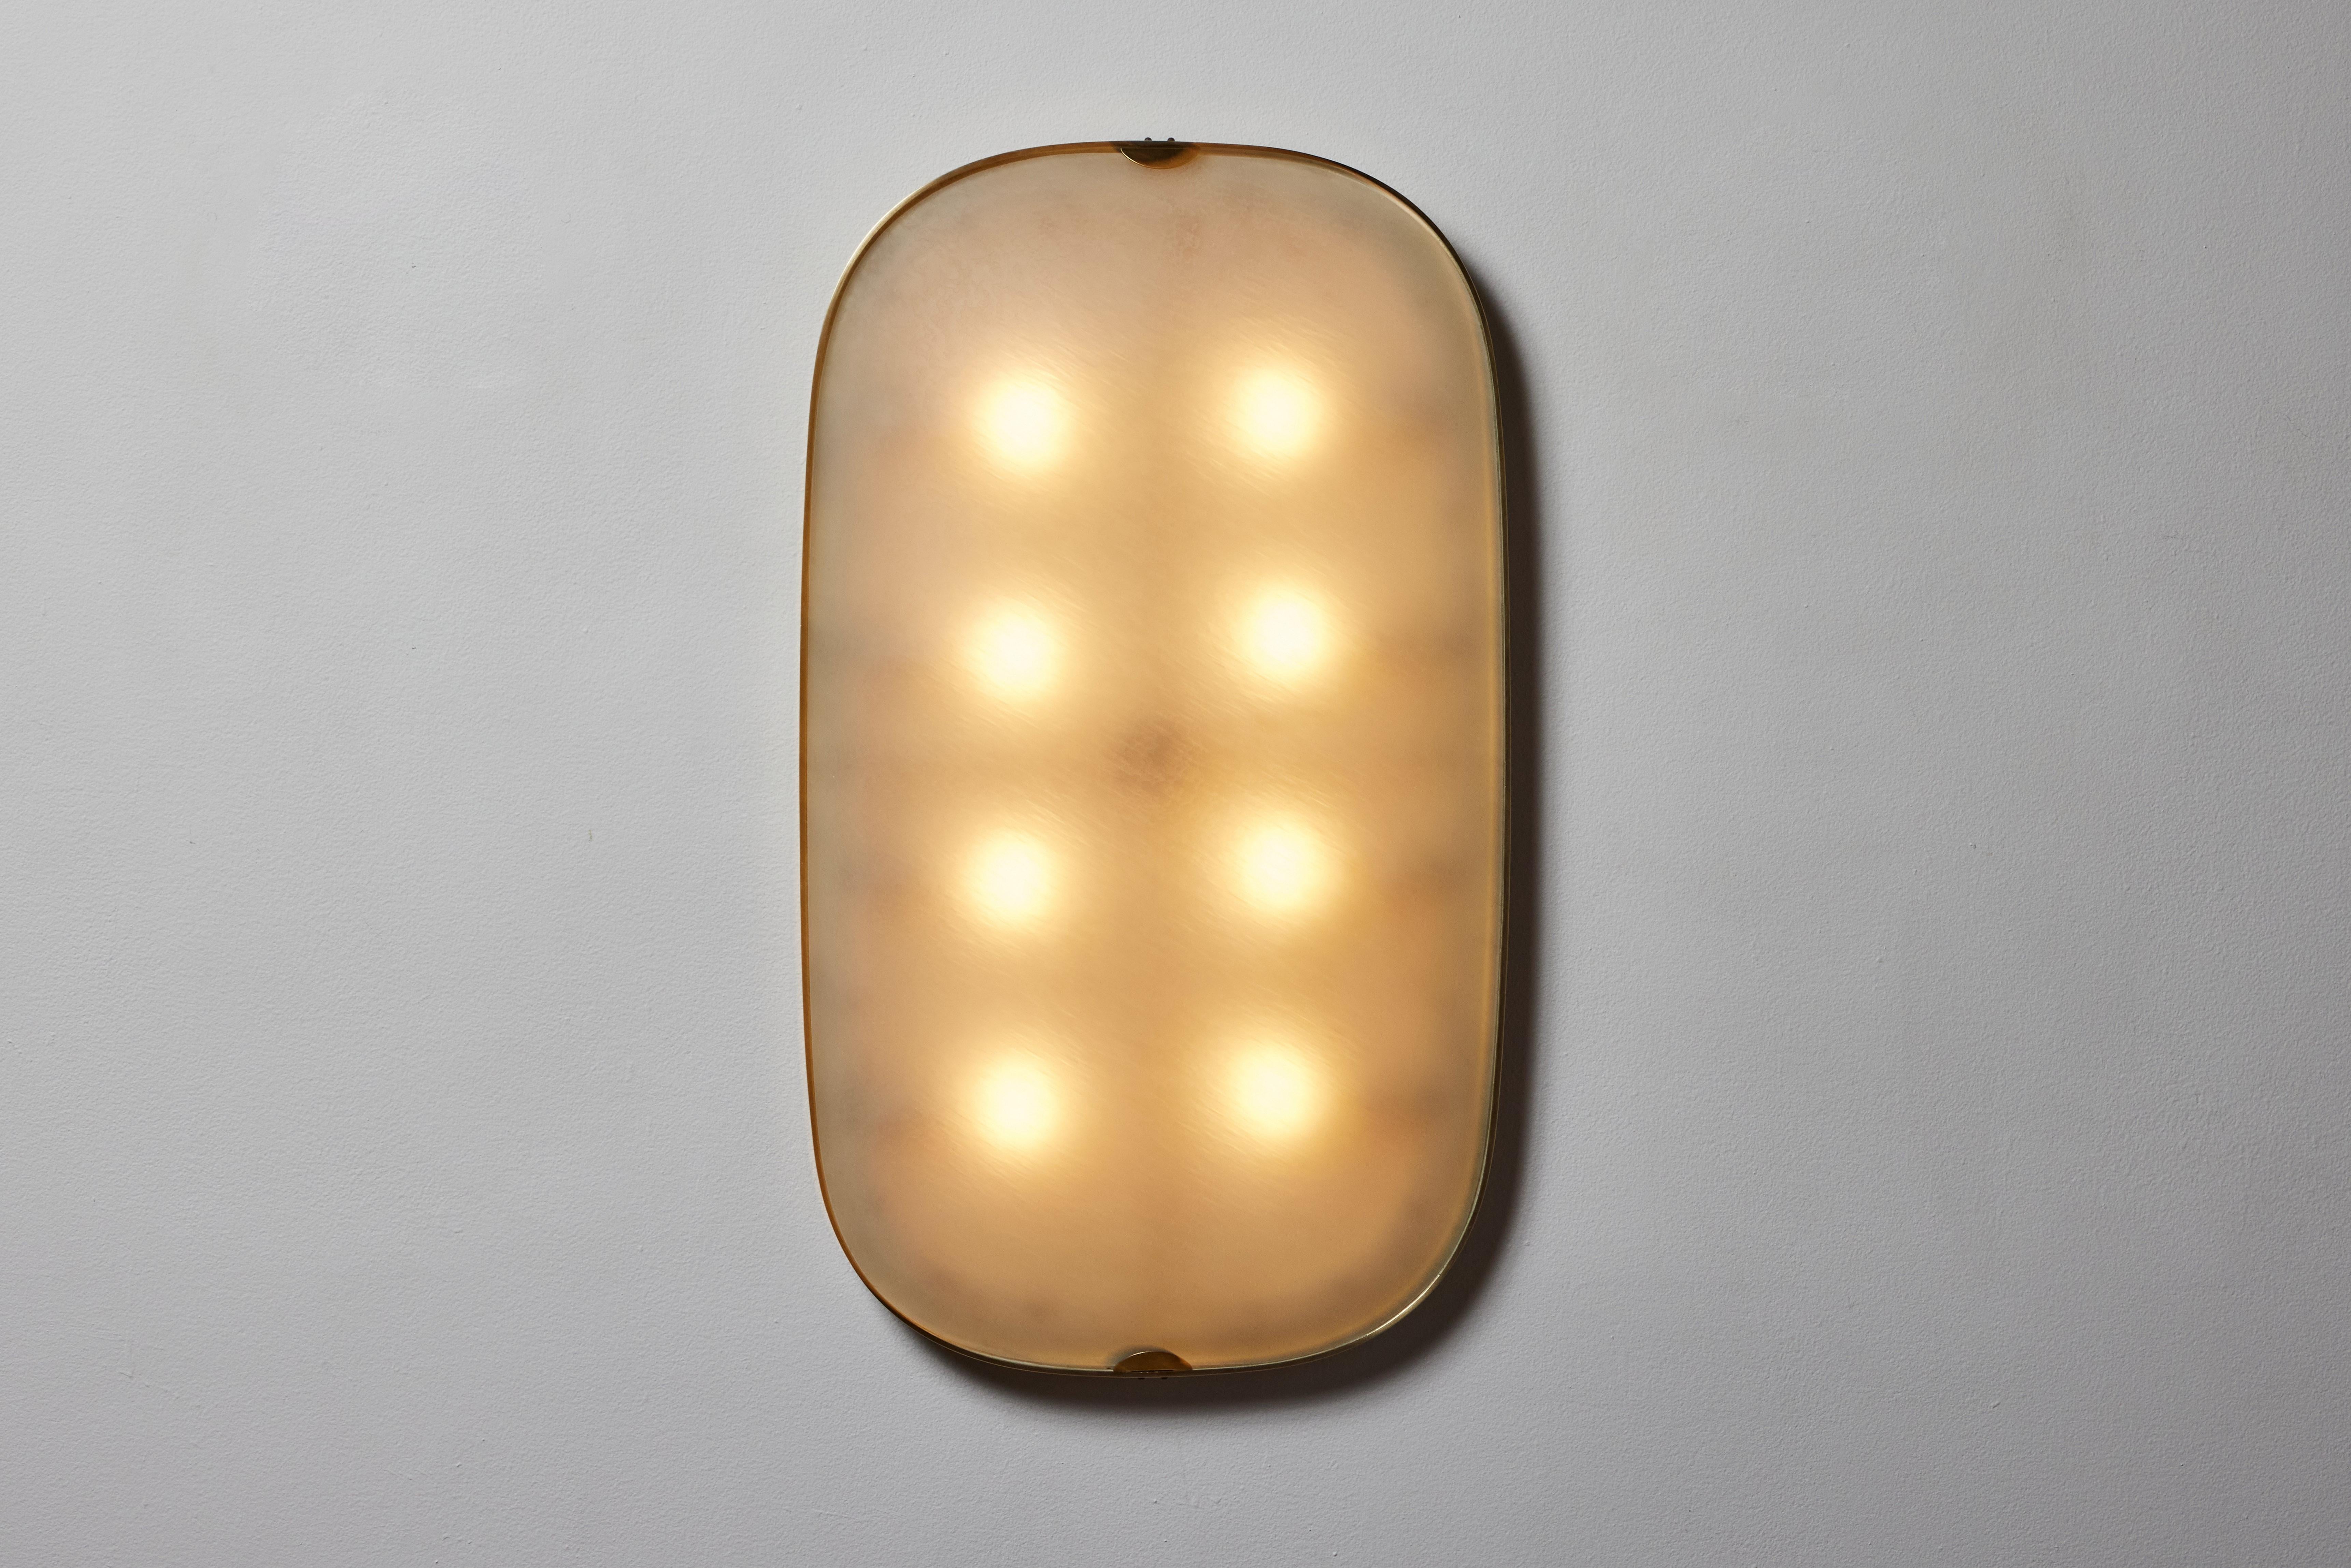 Large flush mount wall /ceiling light by Fontana Arte. Manufactured in Italy, circa 1950's. Textured glass, brass. enameled metal. Rewired for U.S. standards. We recommend eight E26 25w maximum bulbs. Bulbs provided as a one time courtesy.